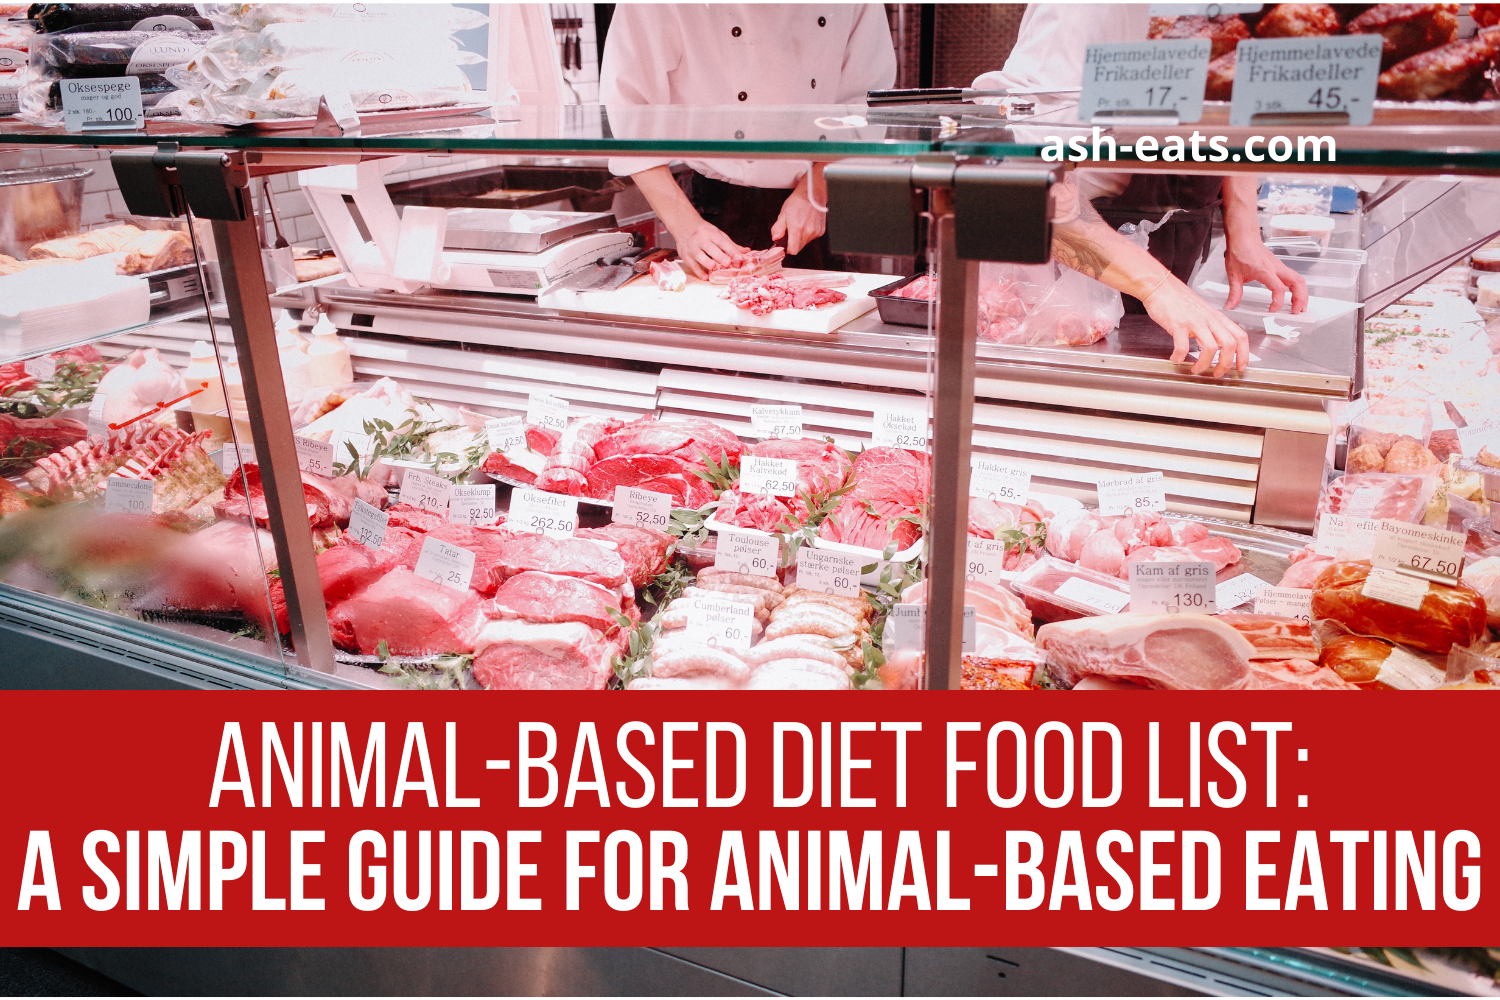 Animal-Based Diet Food List: A Simple Guide for Animal-Based Eating